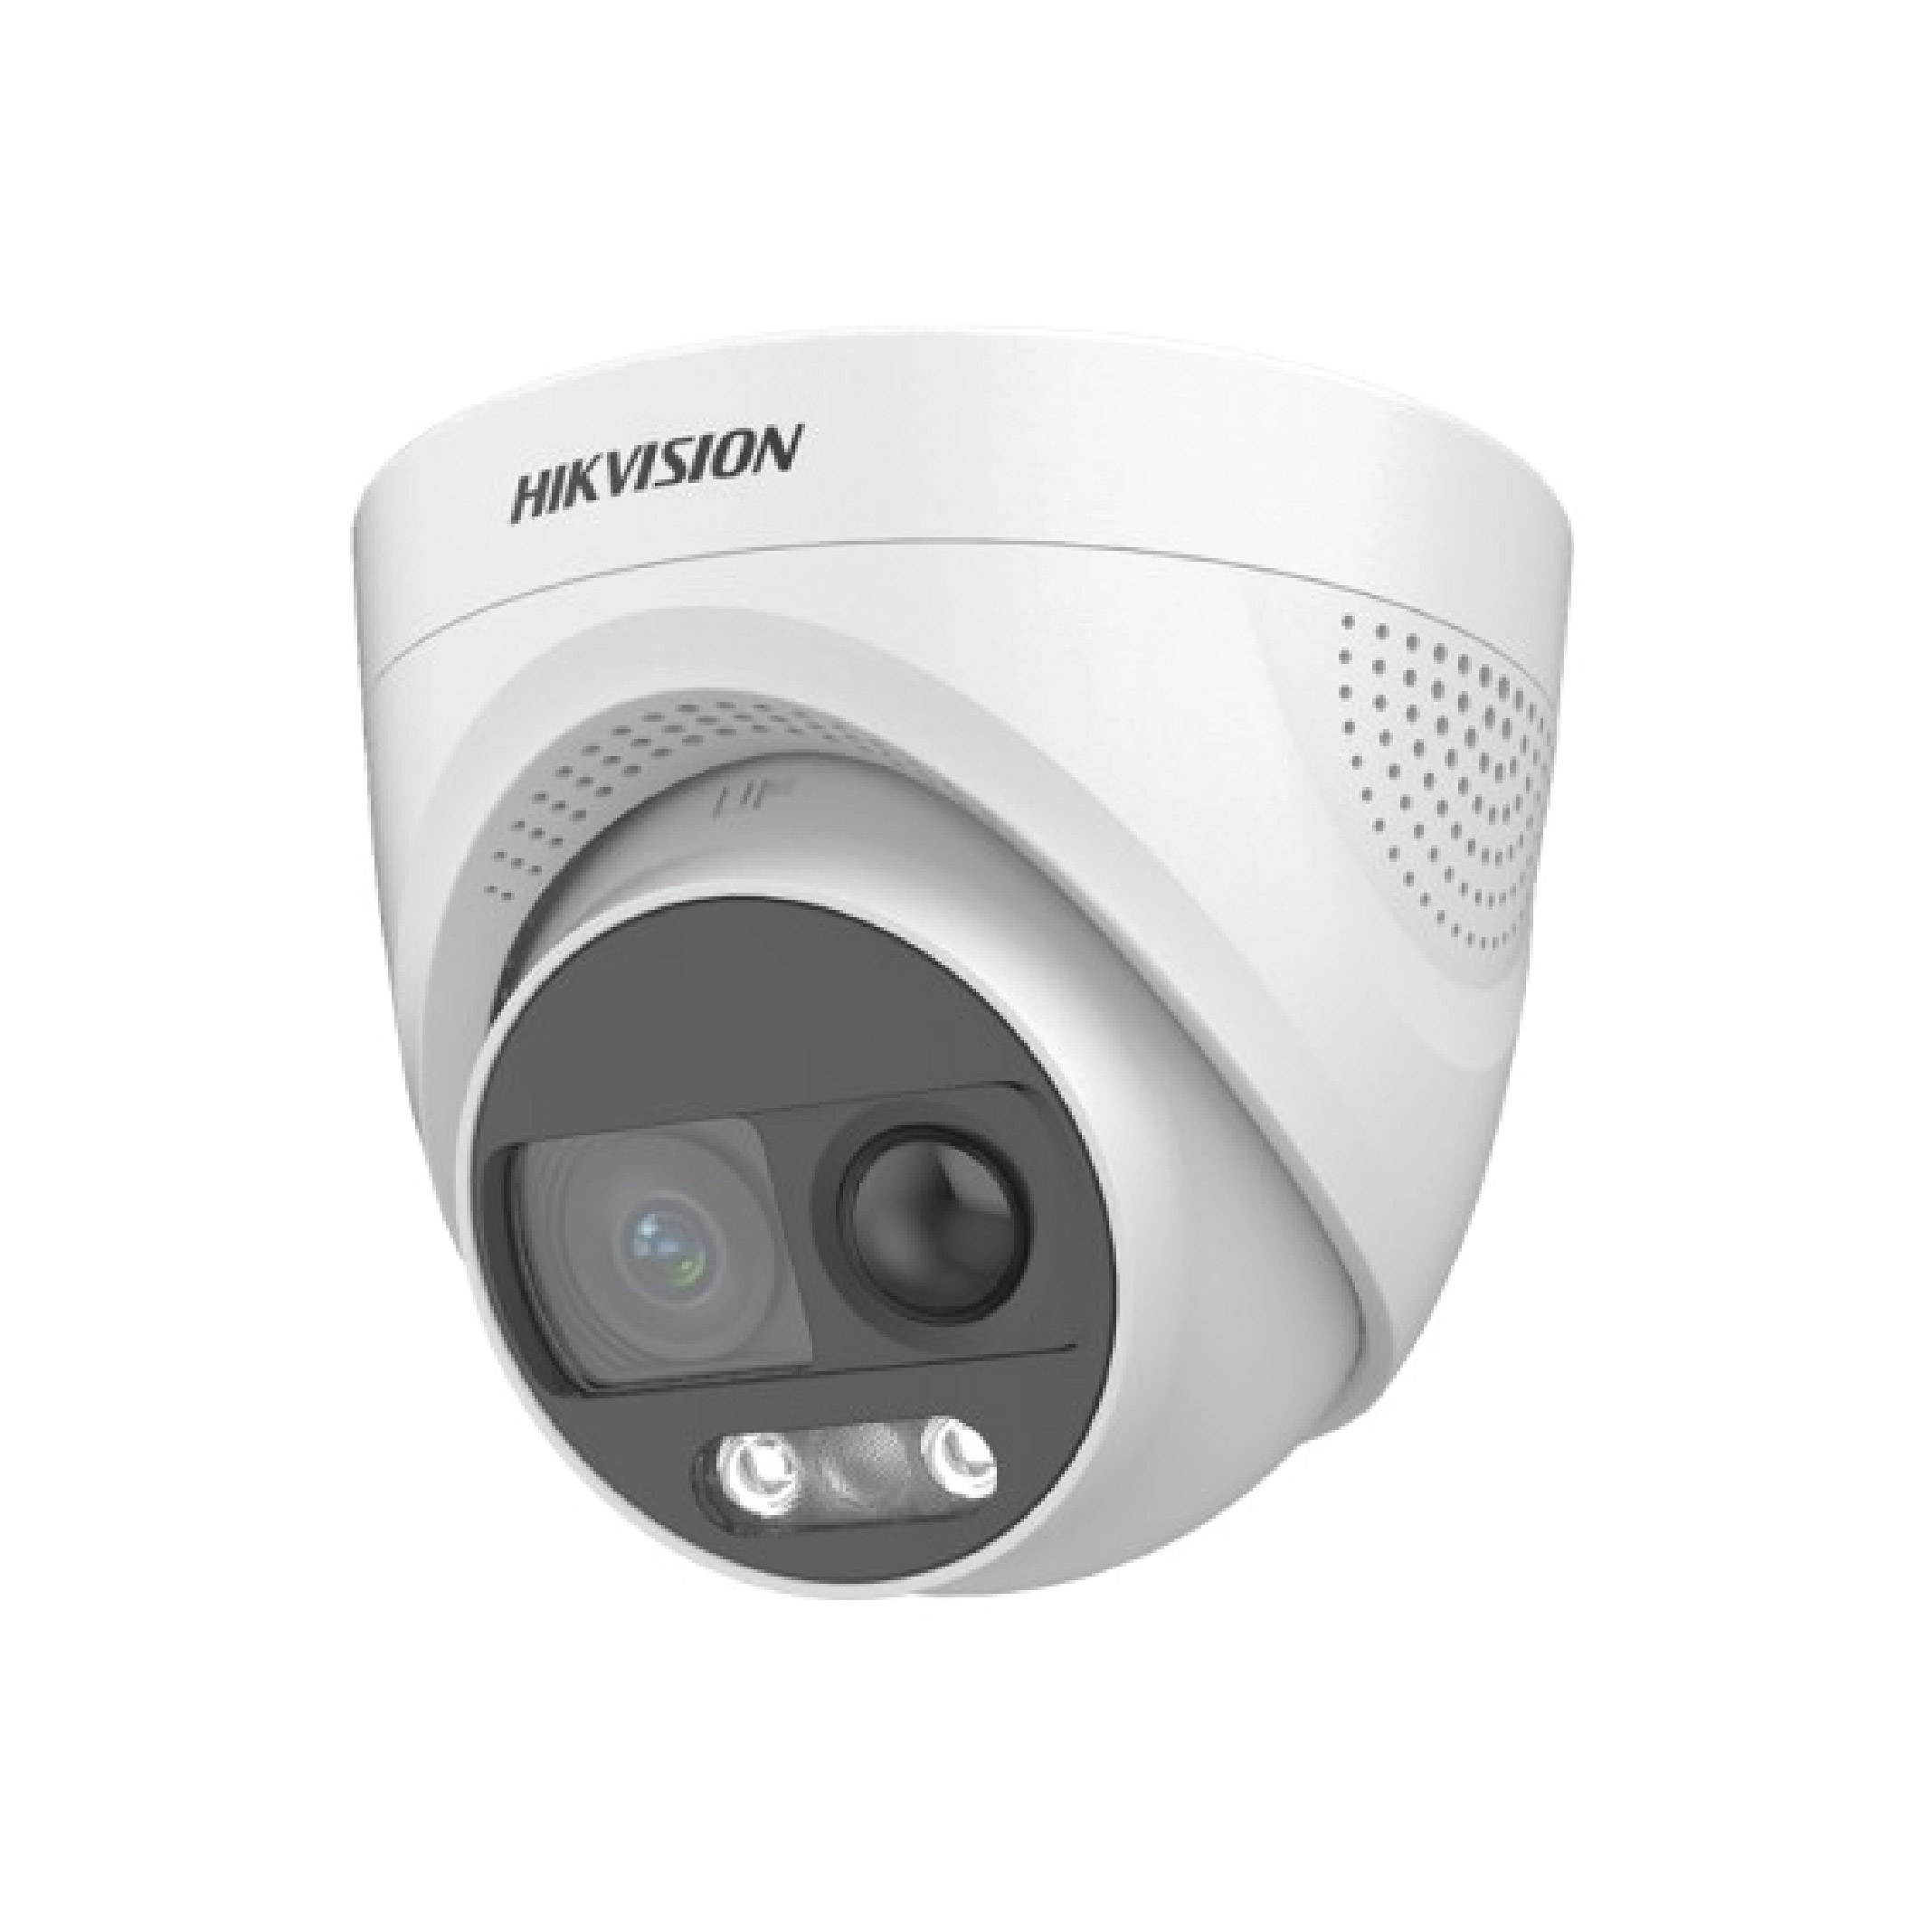 HIKVISION DS-2CE72D0T-PIRXF Turbo HD Camera